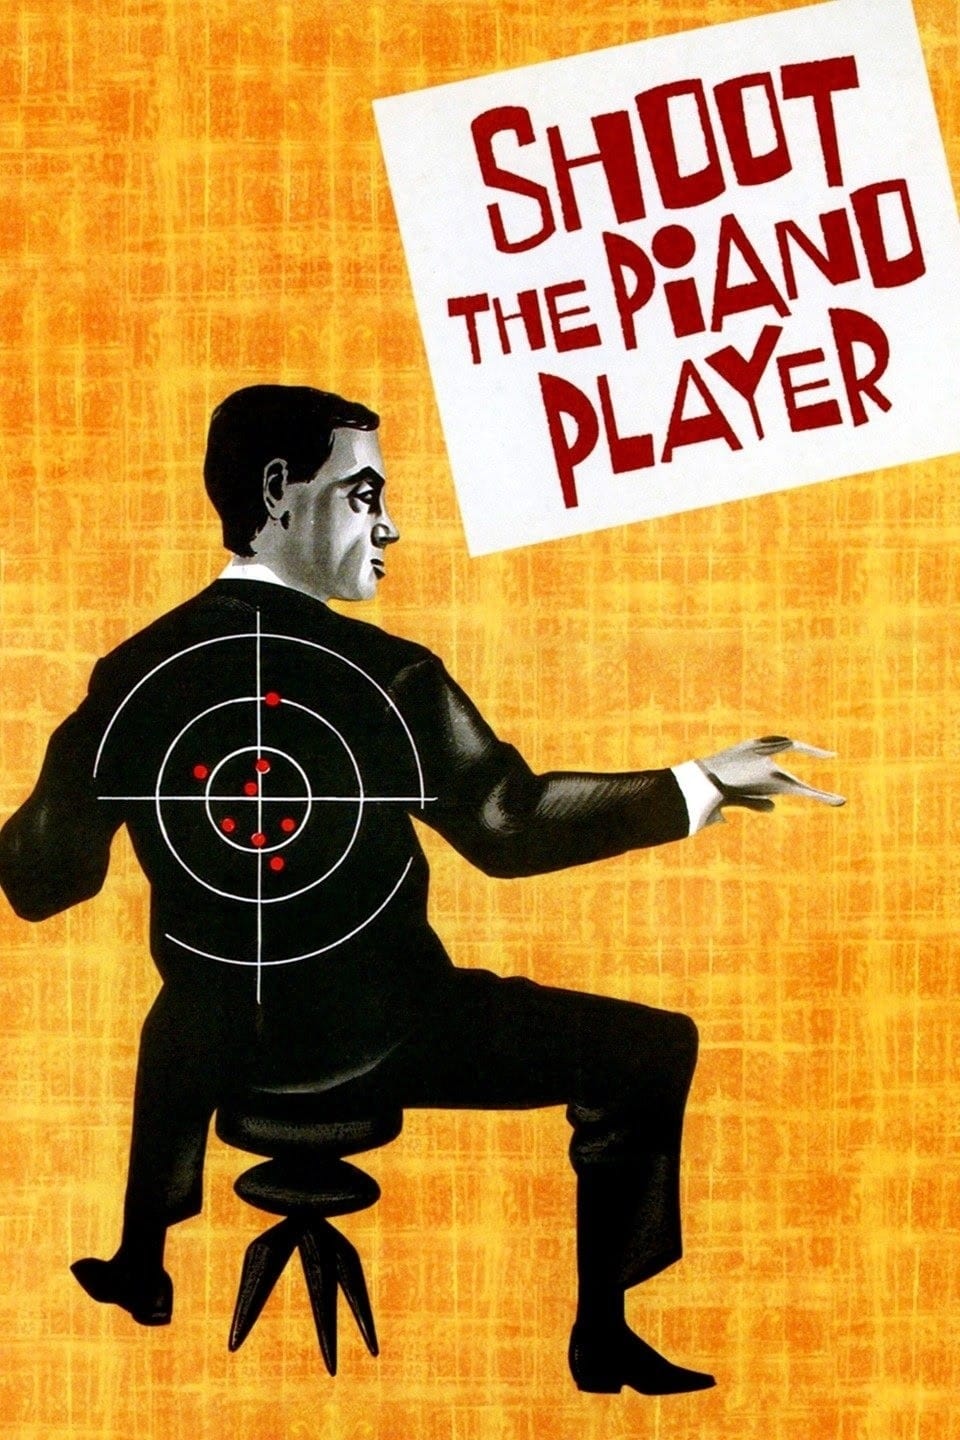 Shoot the Piano Player (1960)